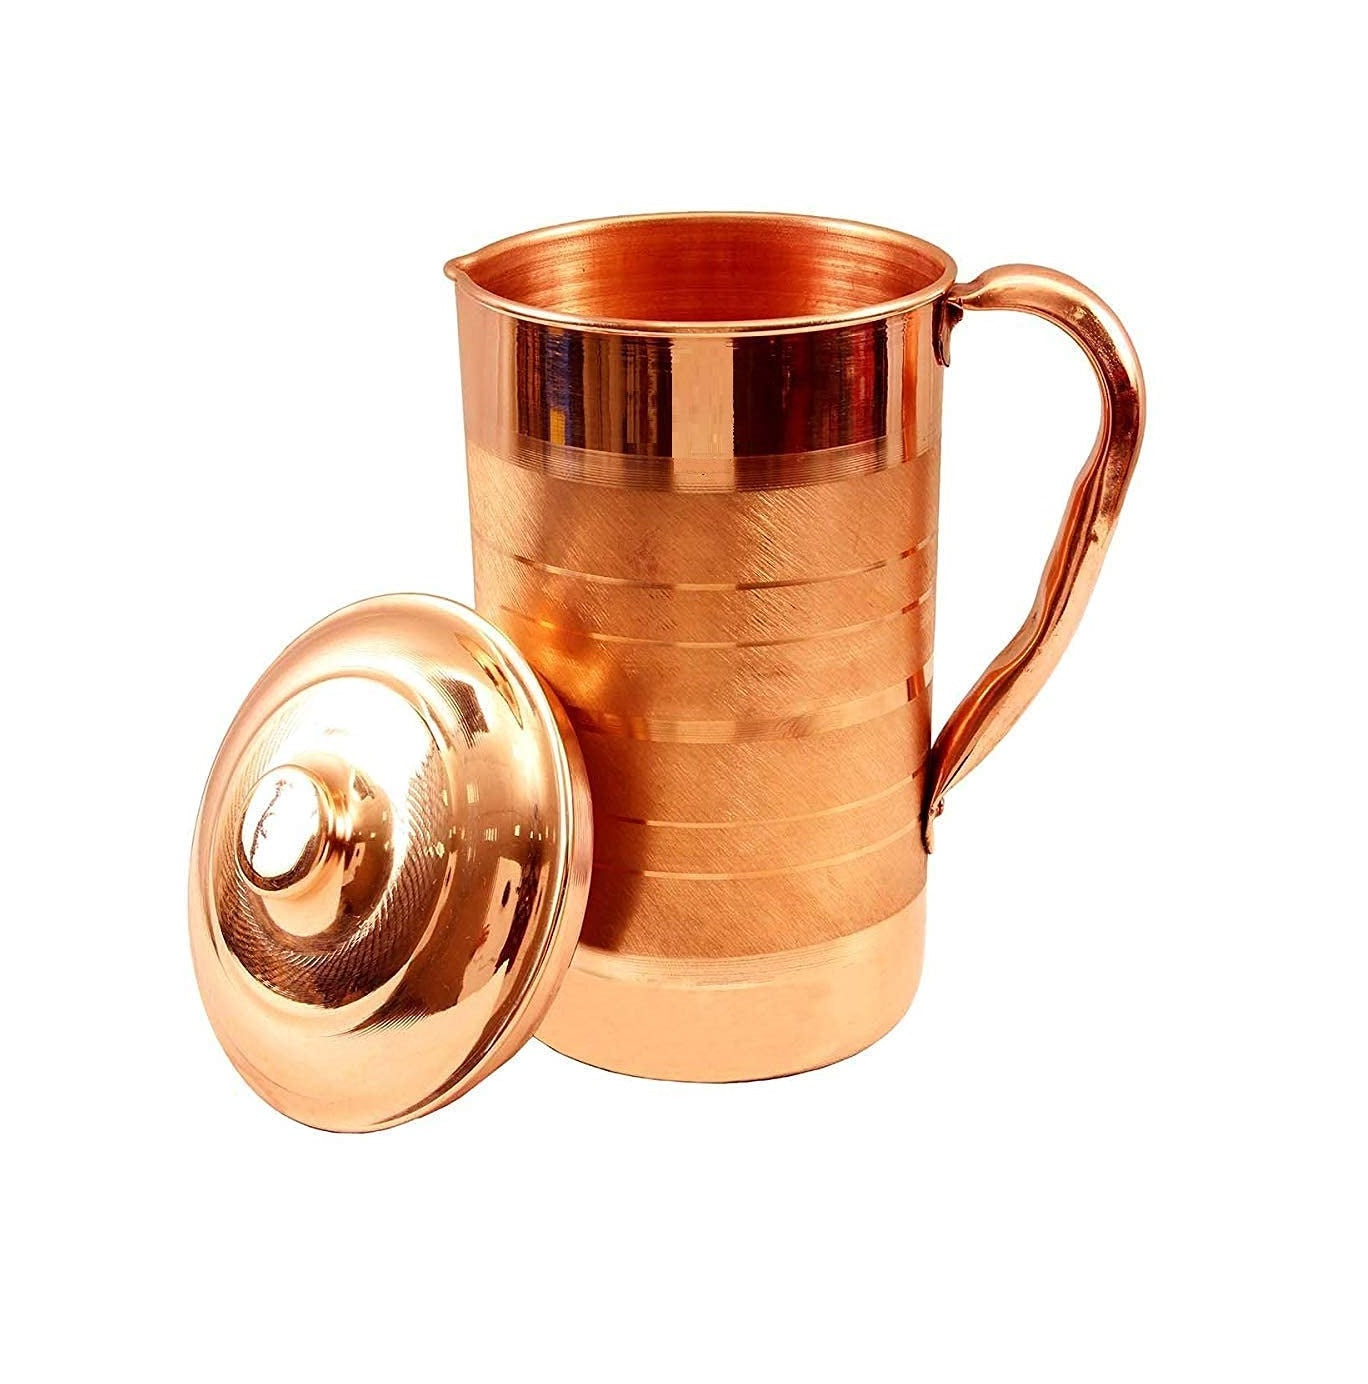 Copper Pitcher for Ayurveda Health Benefit Smooth Finished -1500 ml